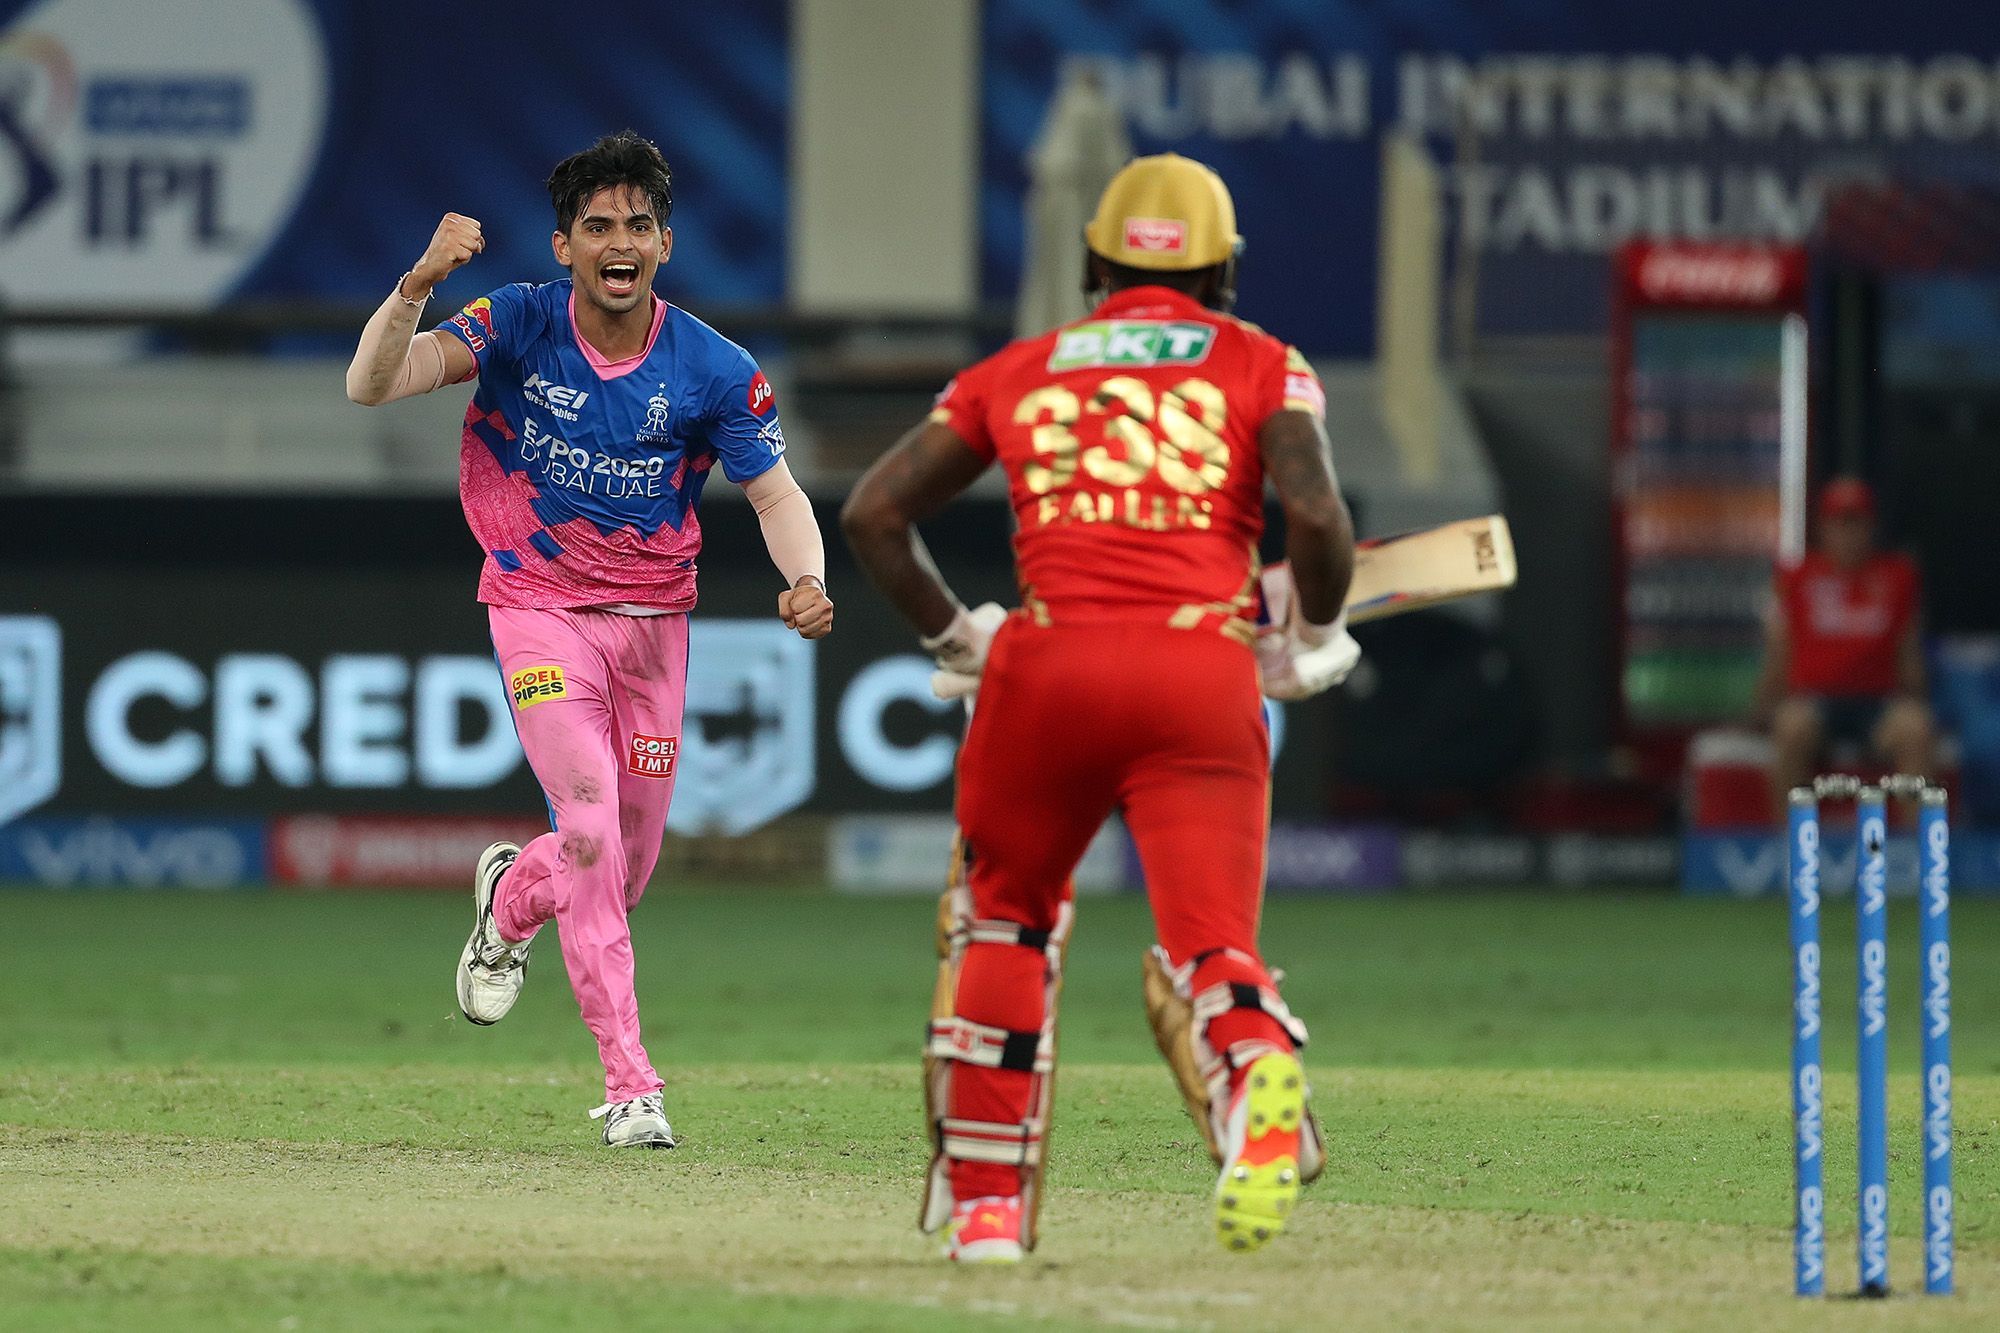 Kartik Tyagi successfully defended 4 runs in the final over | BCCI/IPL